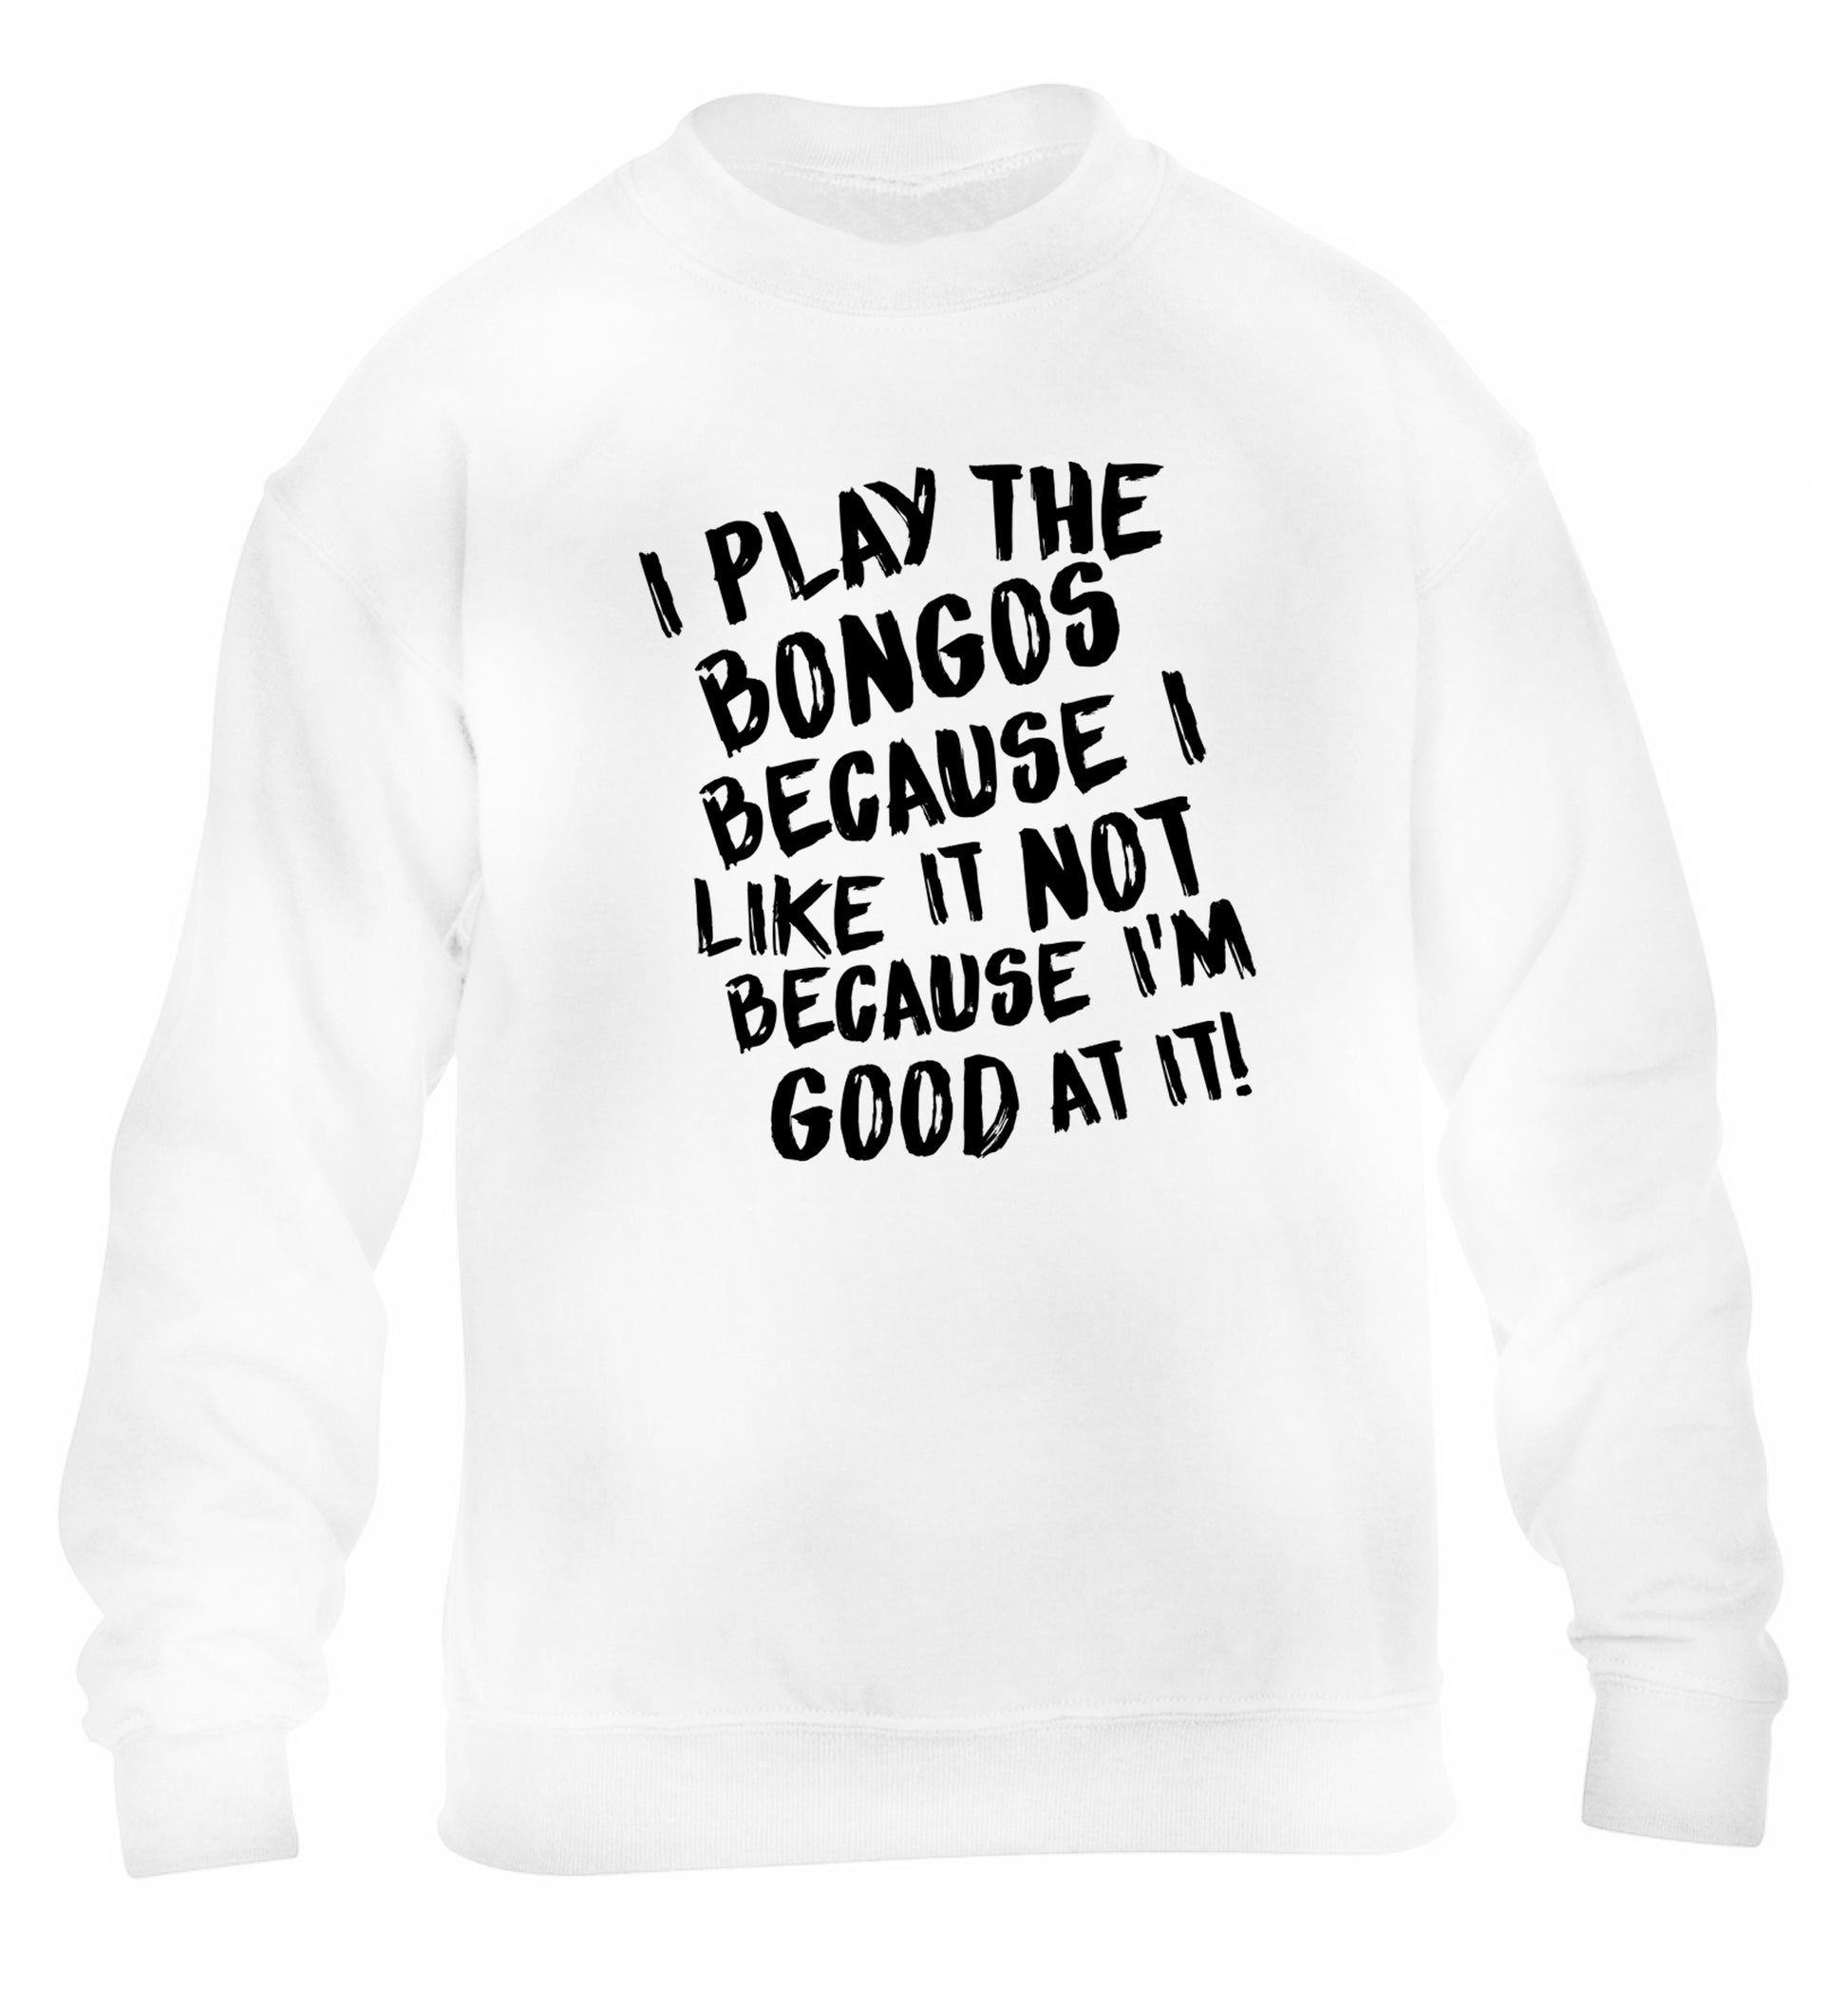 I play the bongos because I like it not because I'm good at it children's white sweater 12-14 Years